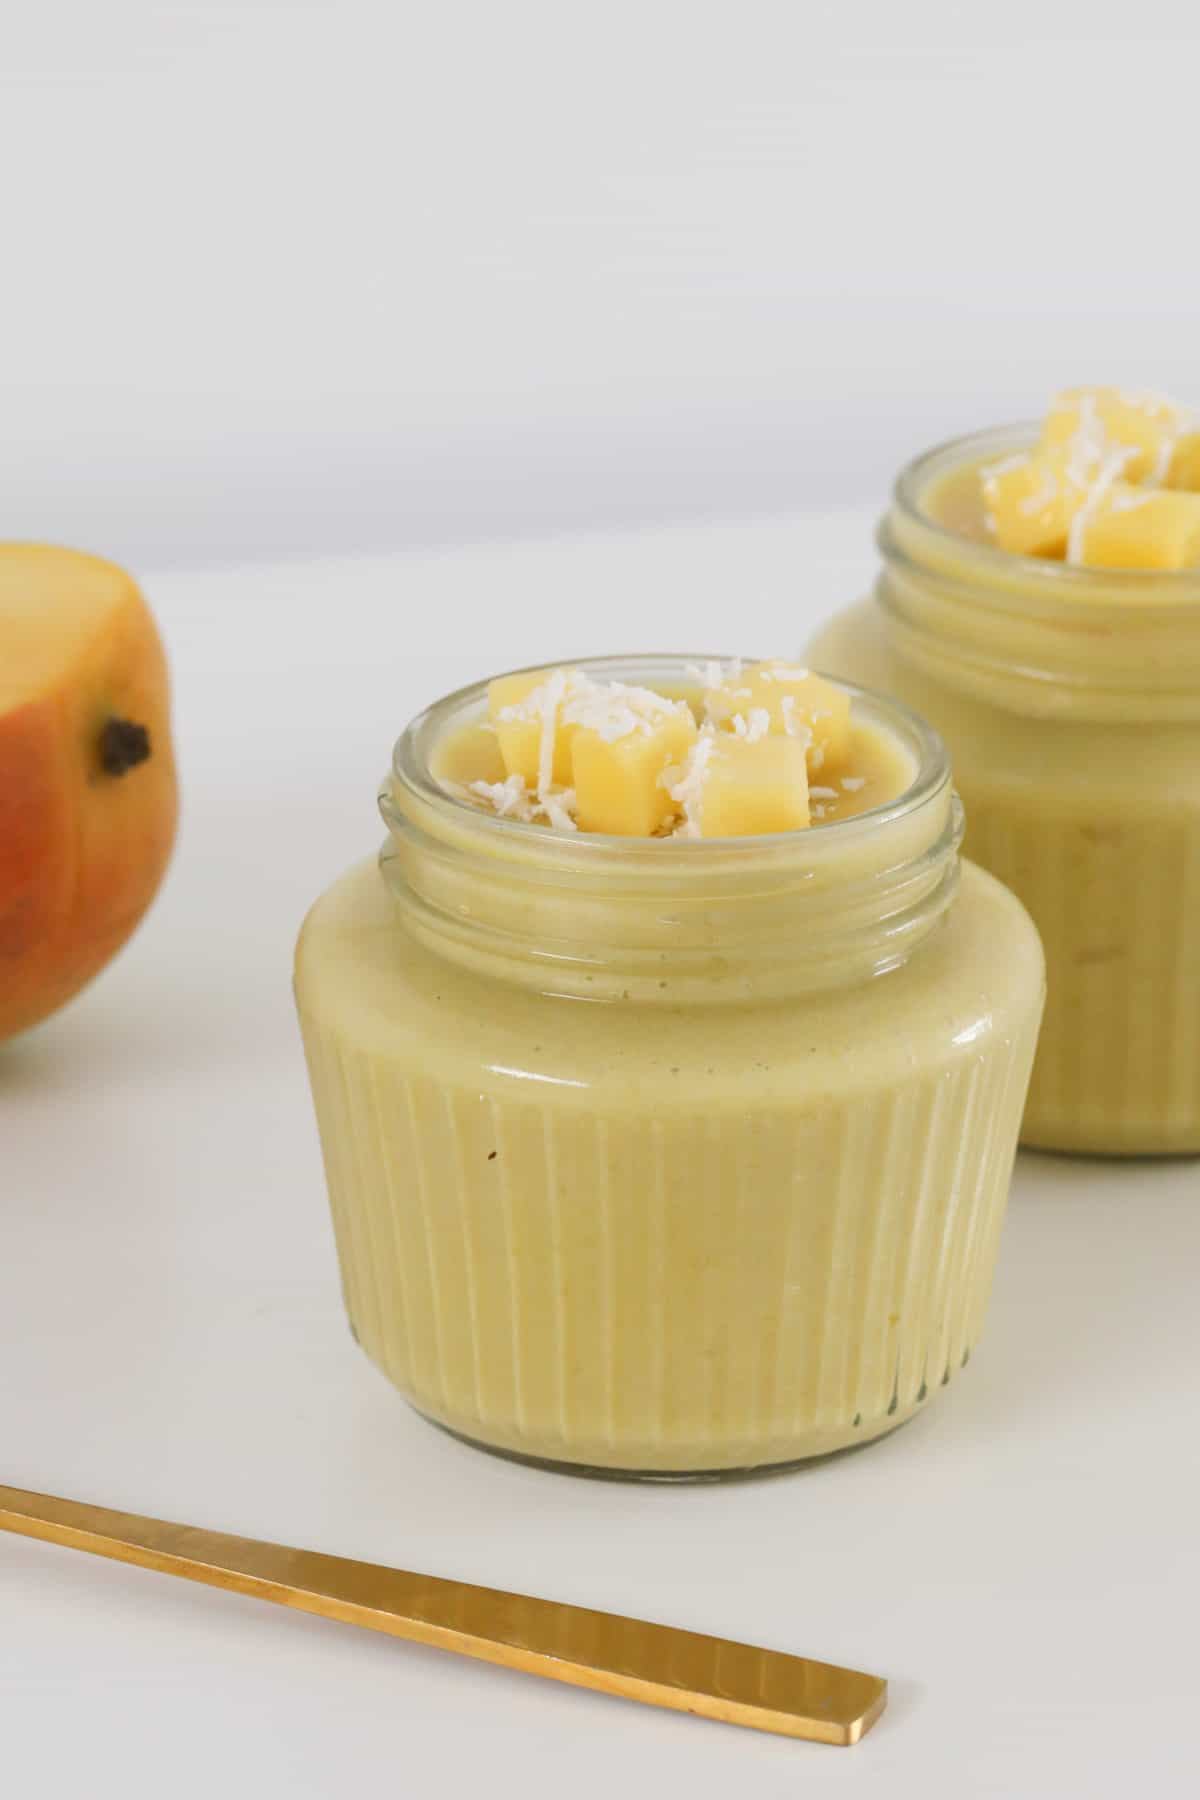 A fruity dessert in individual jars.